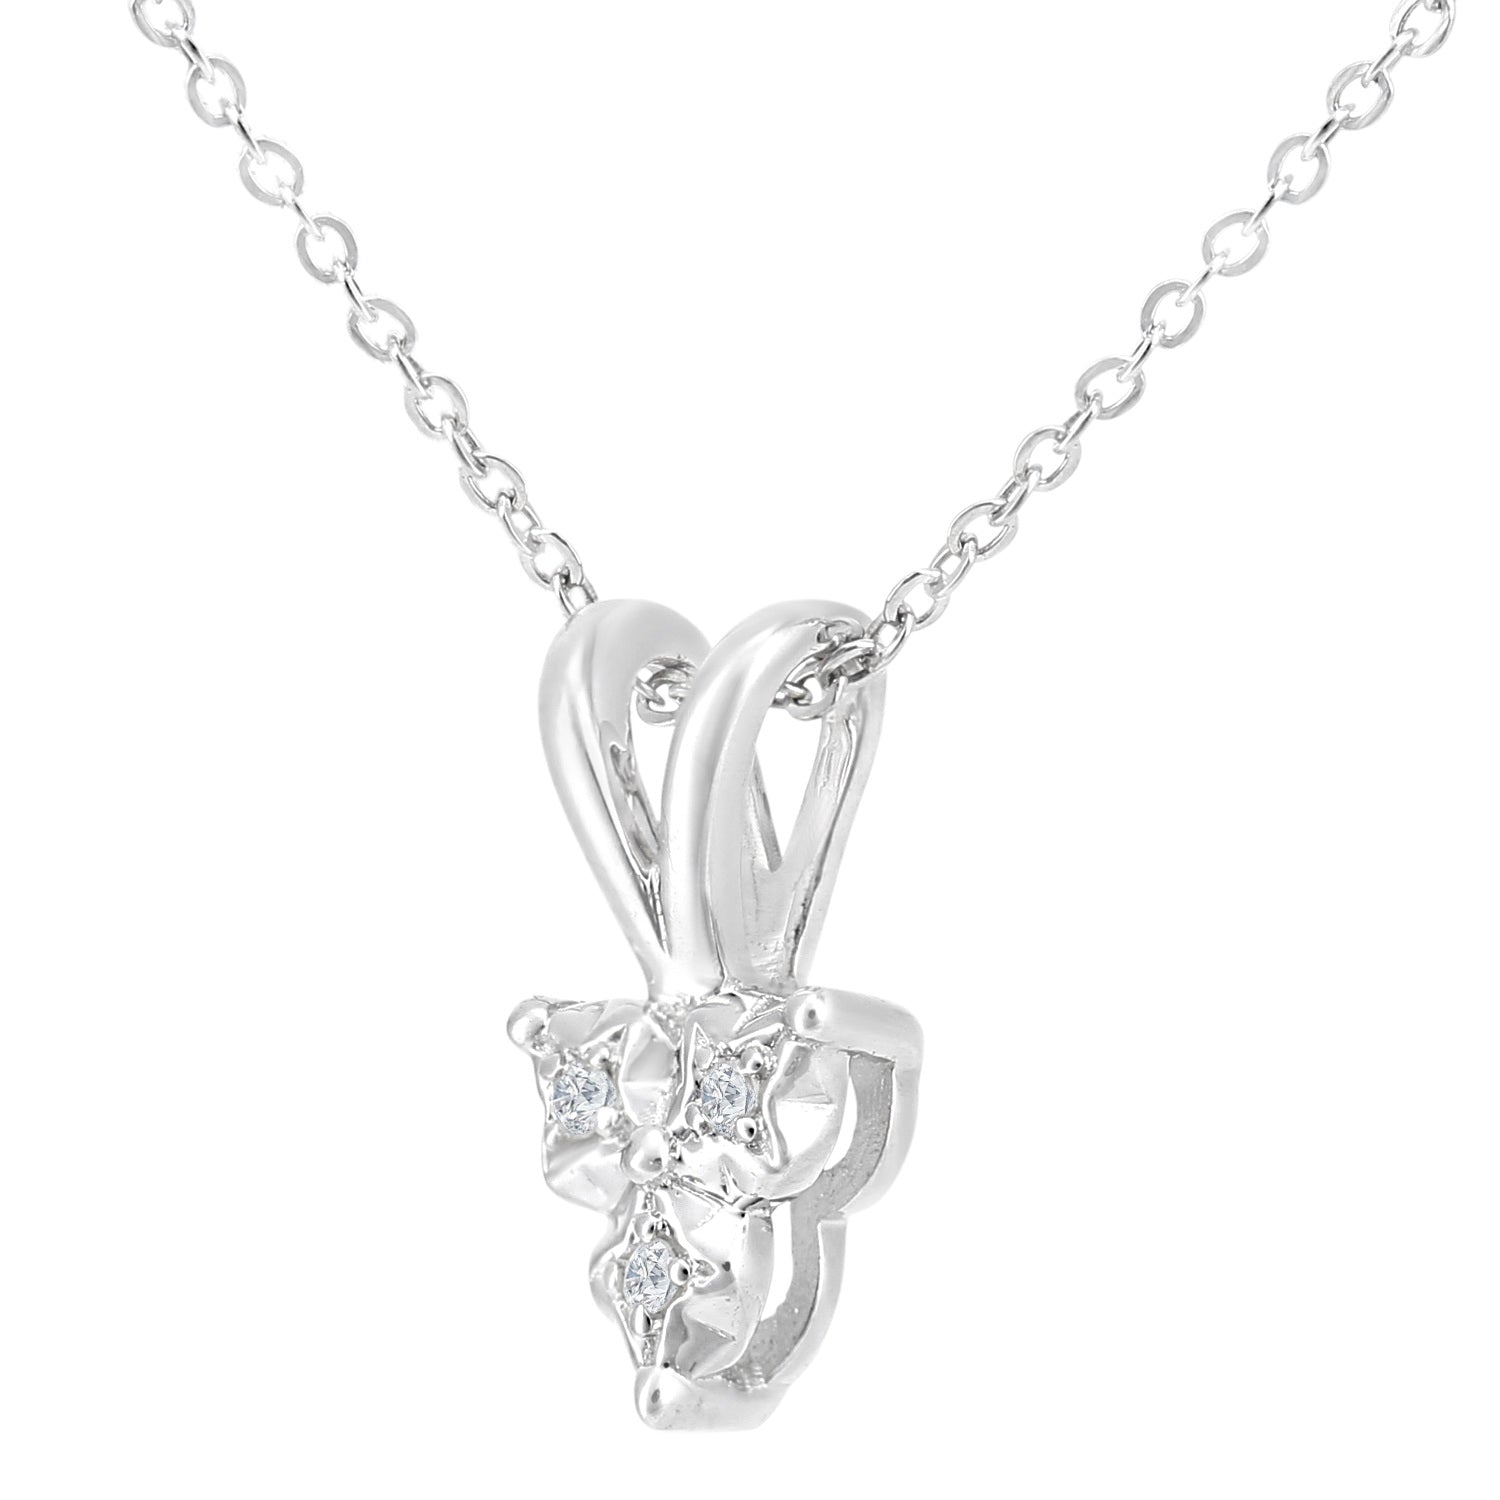 9ct White Gold  2pts Diamond Trilogy Pendant Necklace 18 inch - PP0AXL5927W